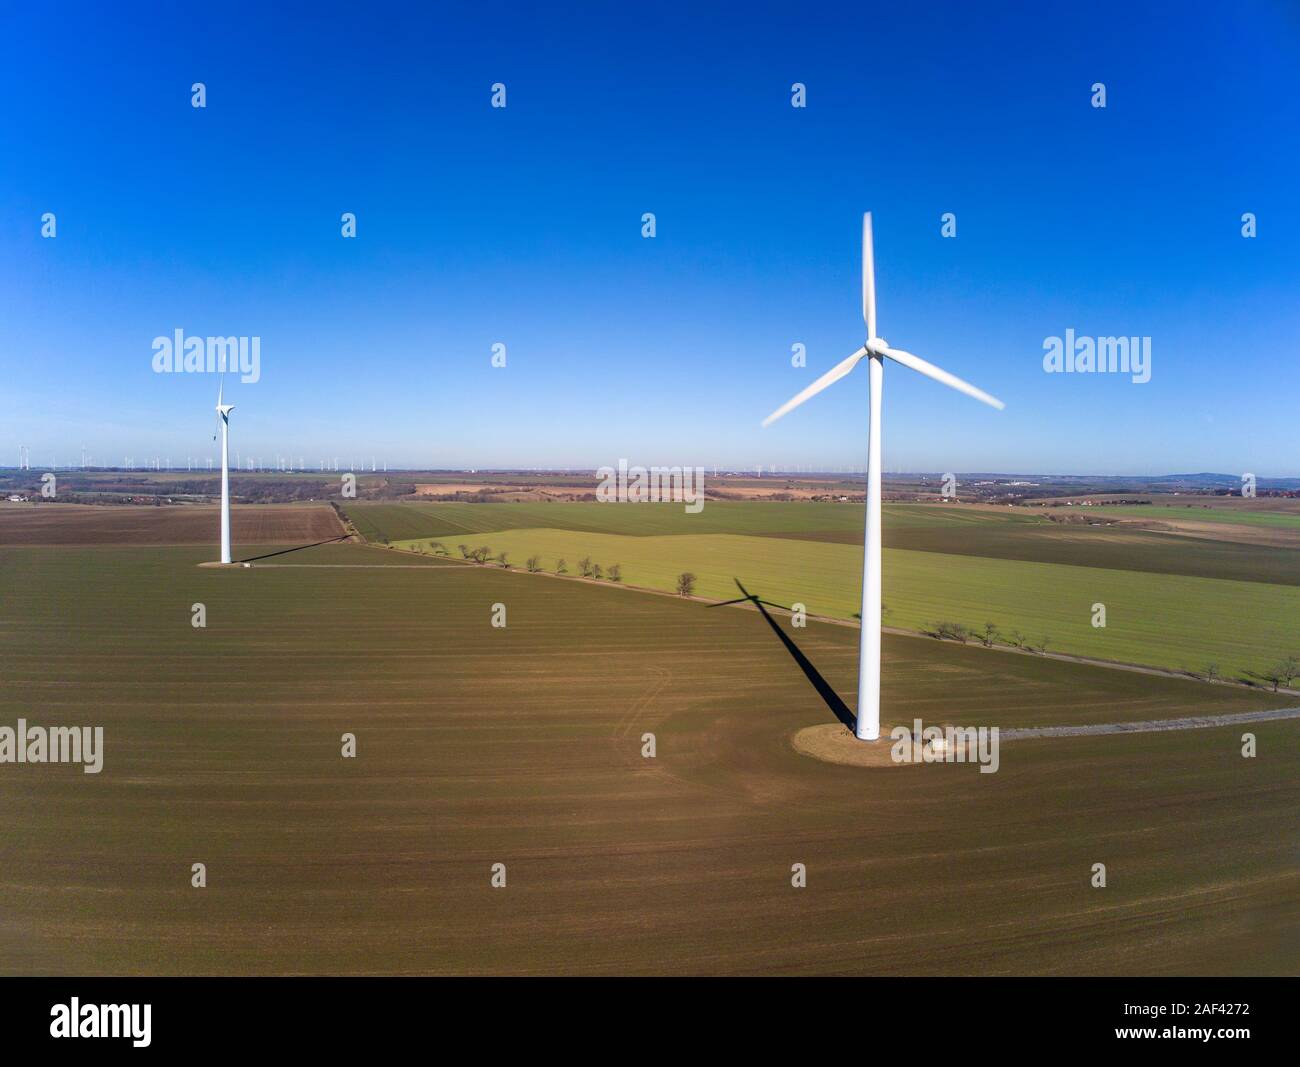 Aerial view of two wind turbines on a field Stock Photo